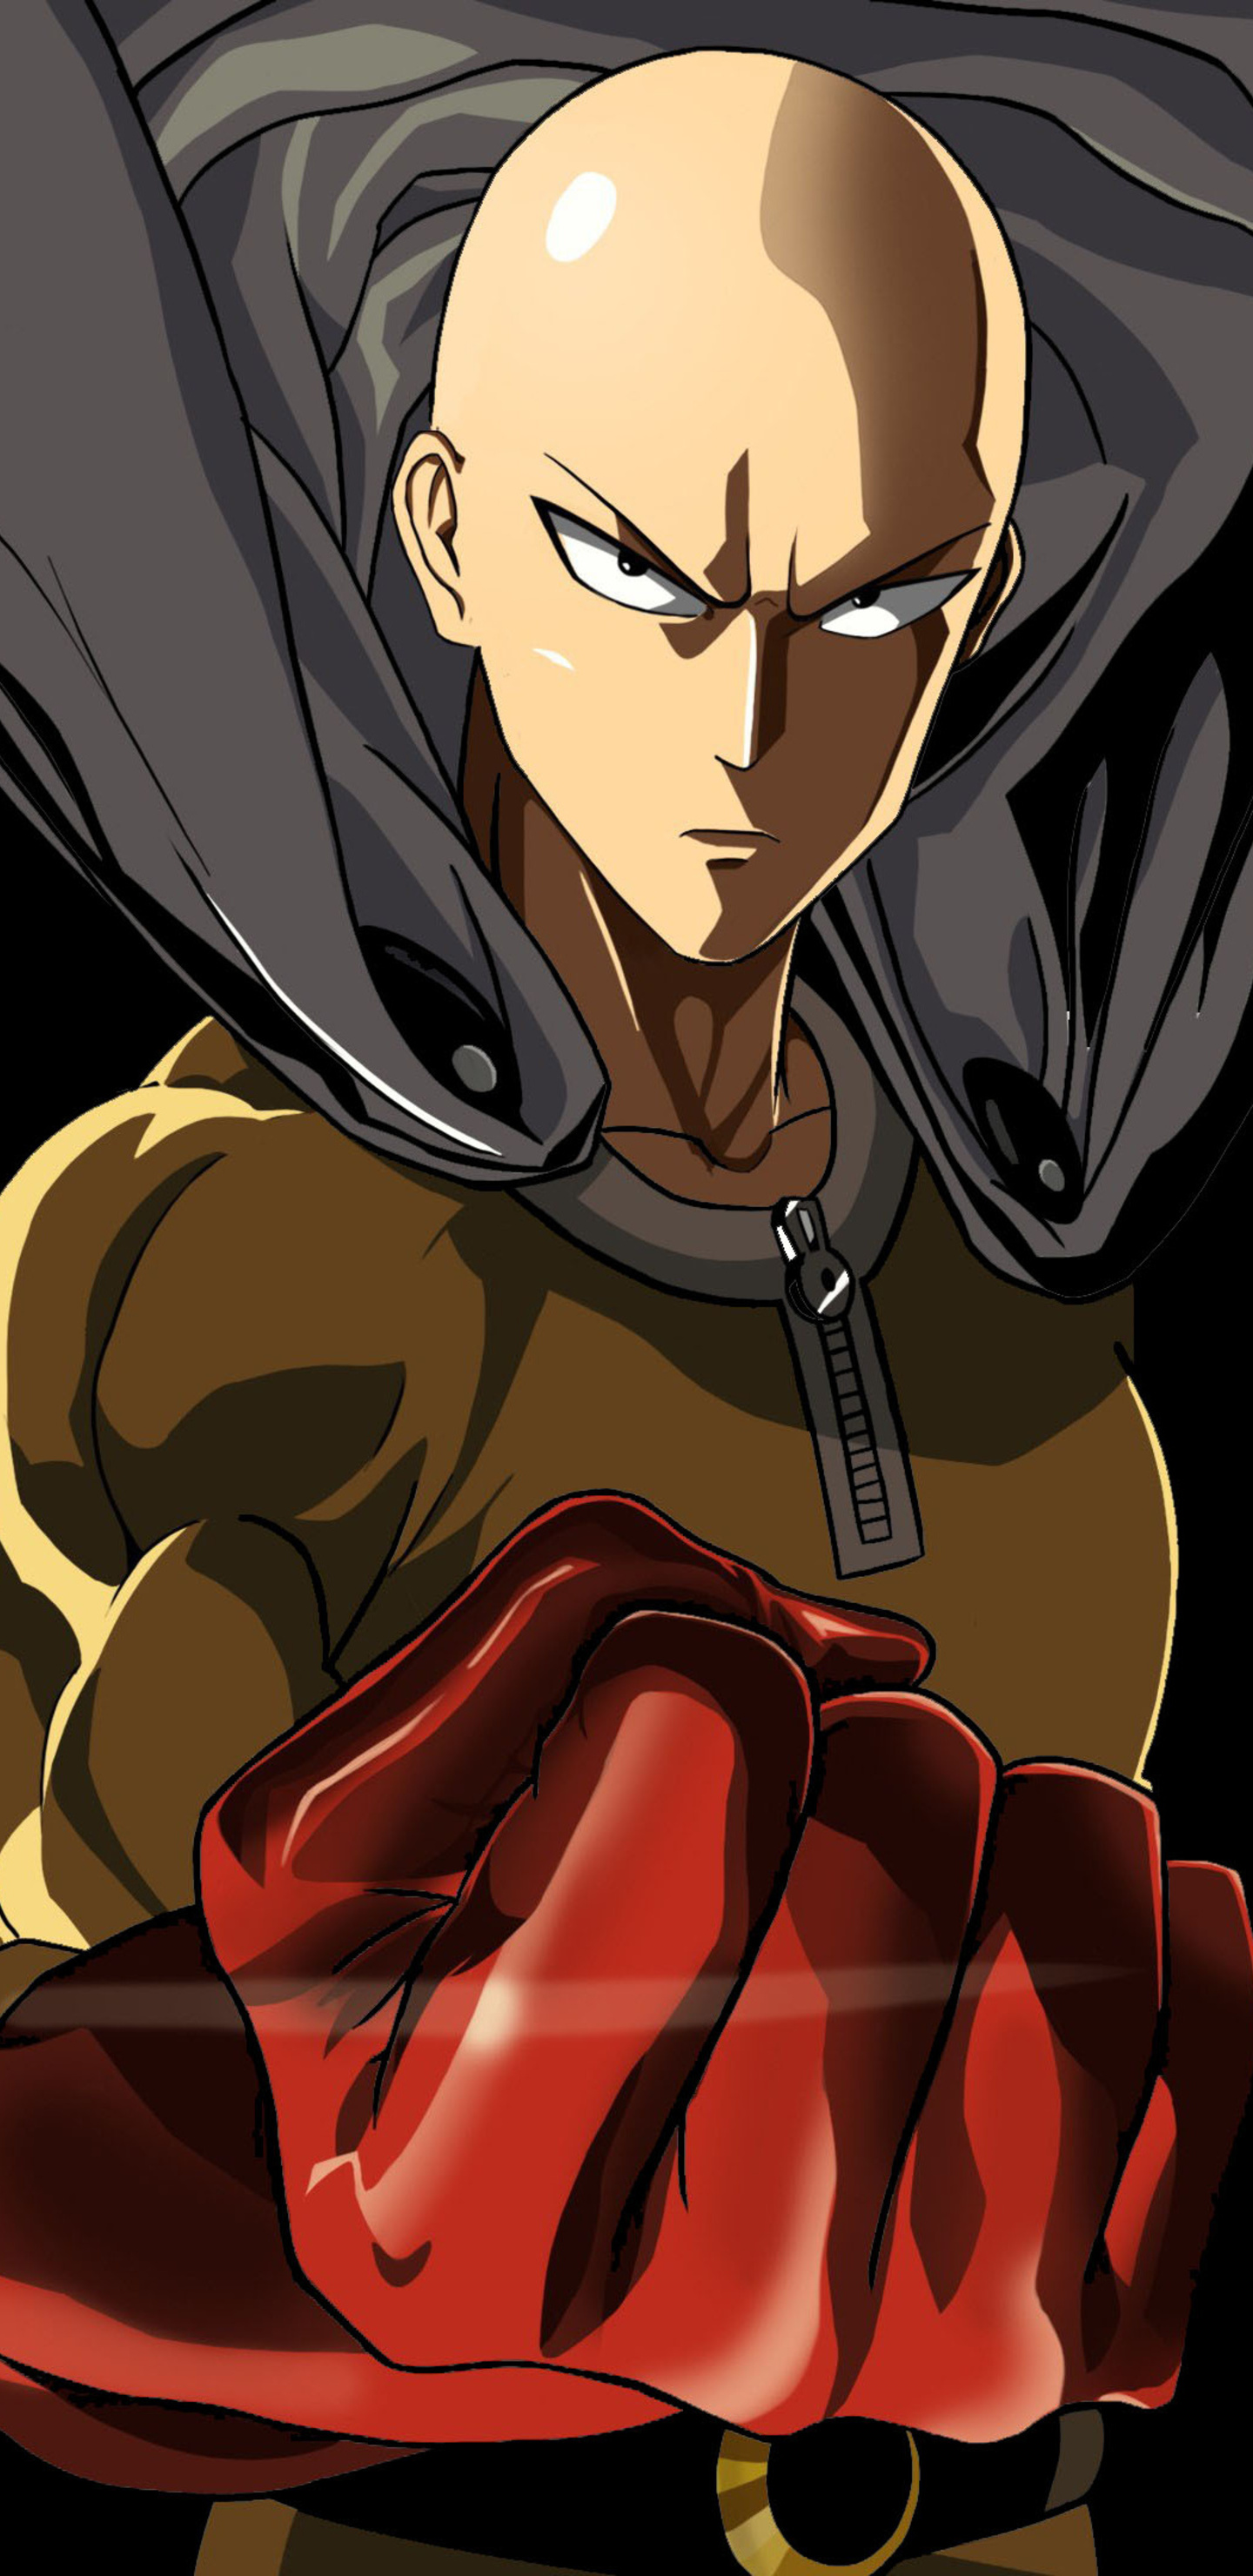 80+ one punch man hd wallpaper for iphone keren on one punch man logo wallpapers